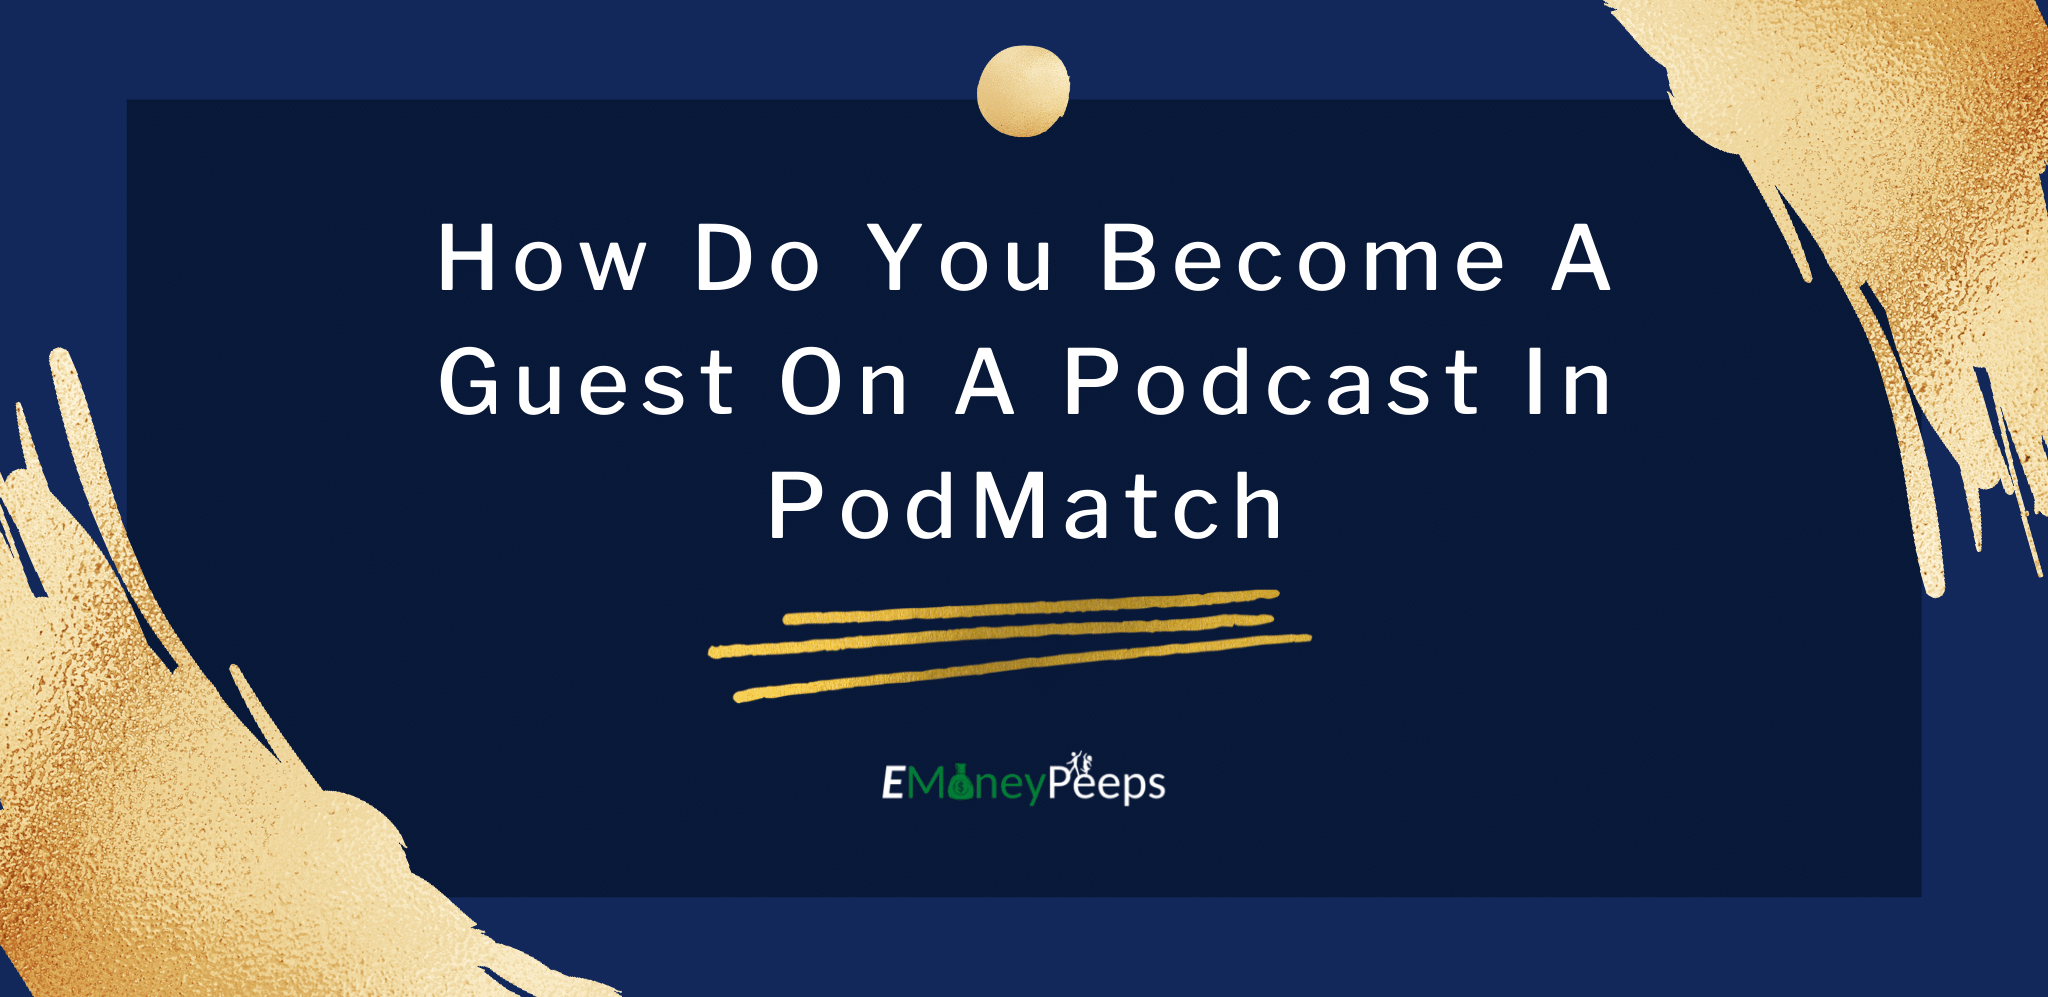 How Do You Become A Guest On A Podcast In PodMatch